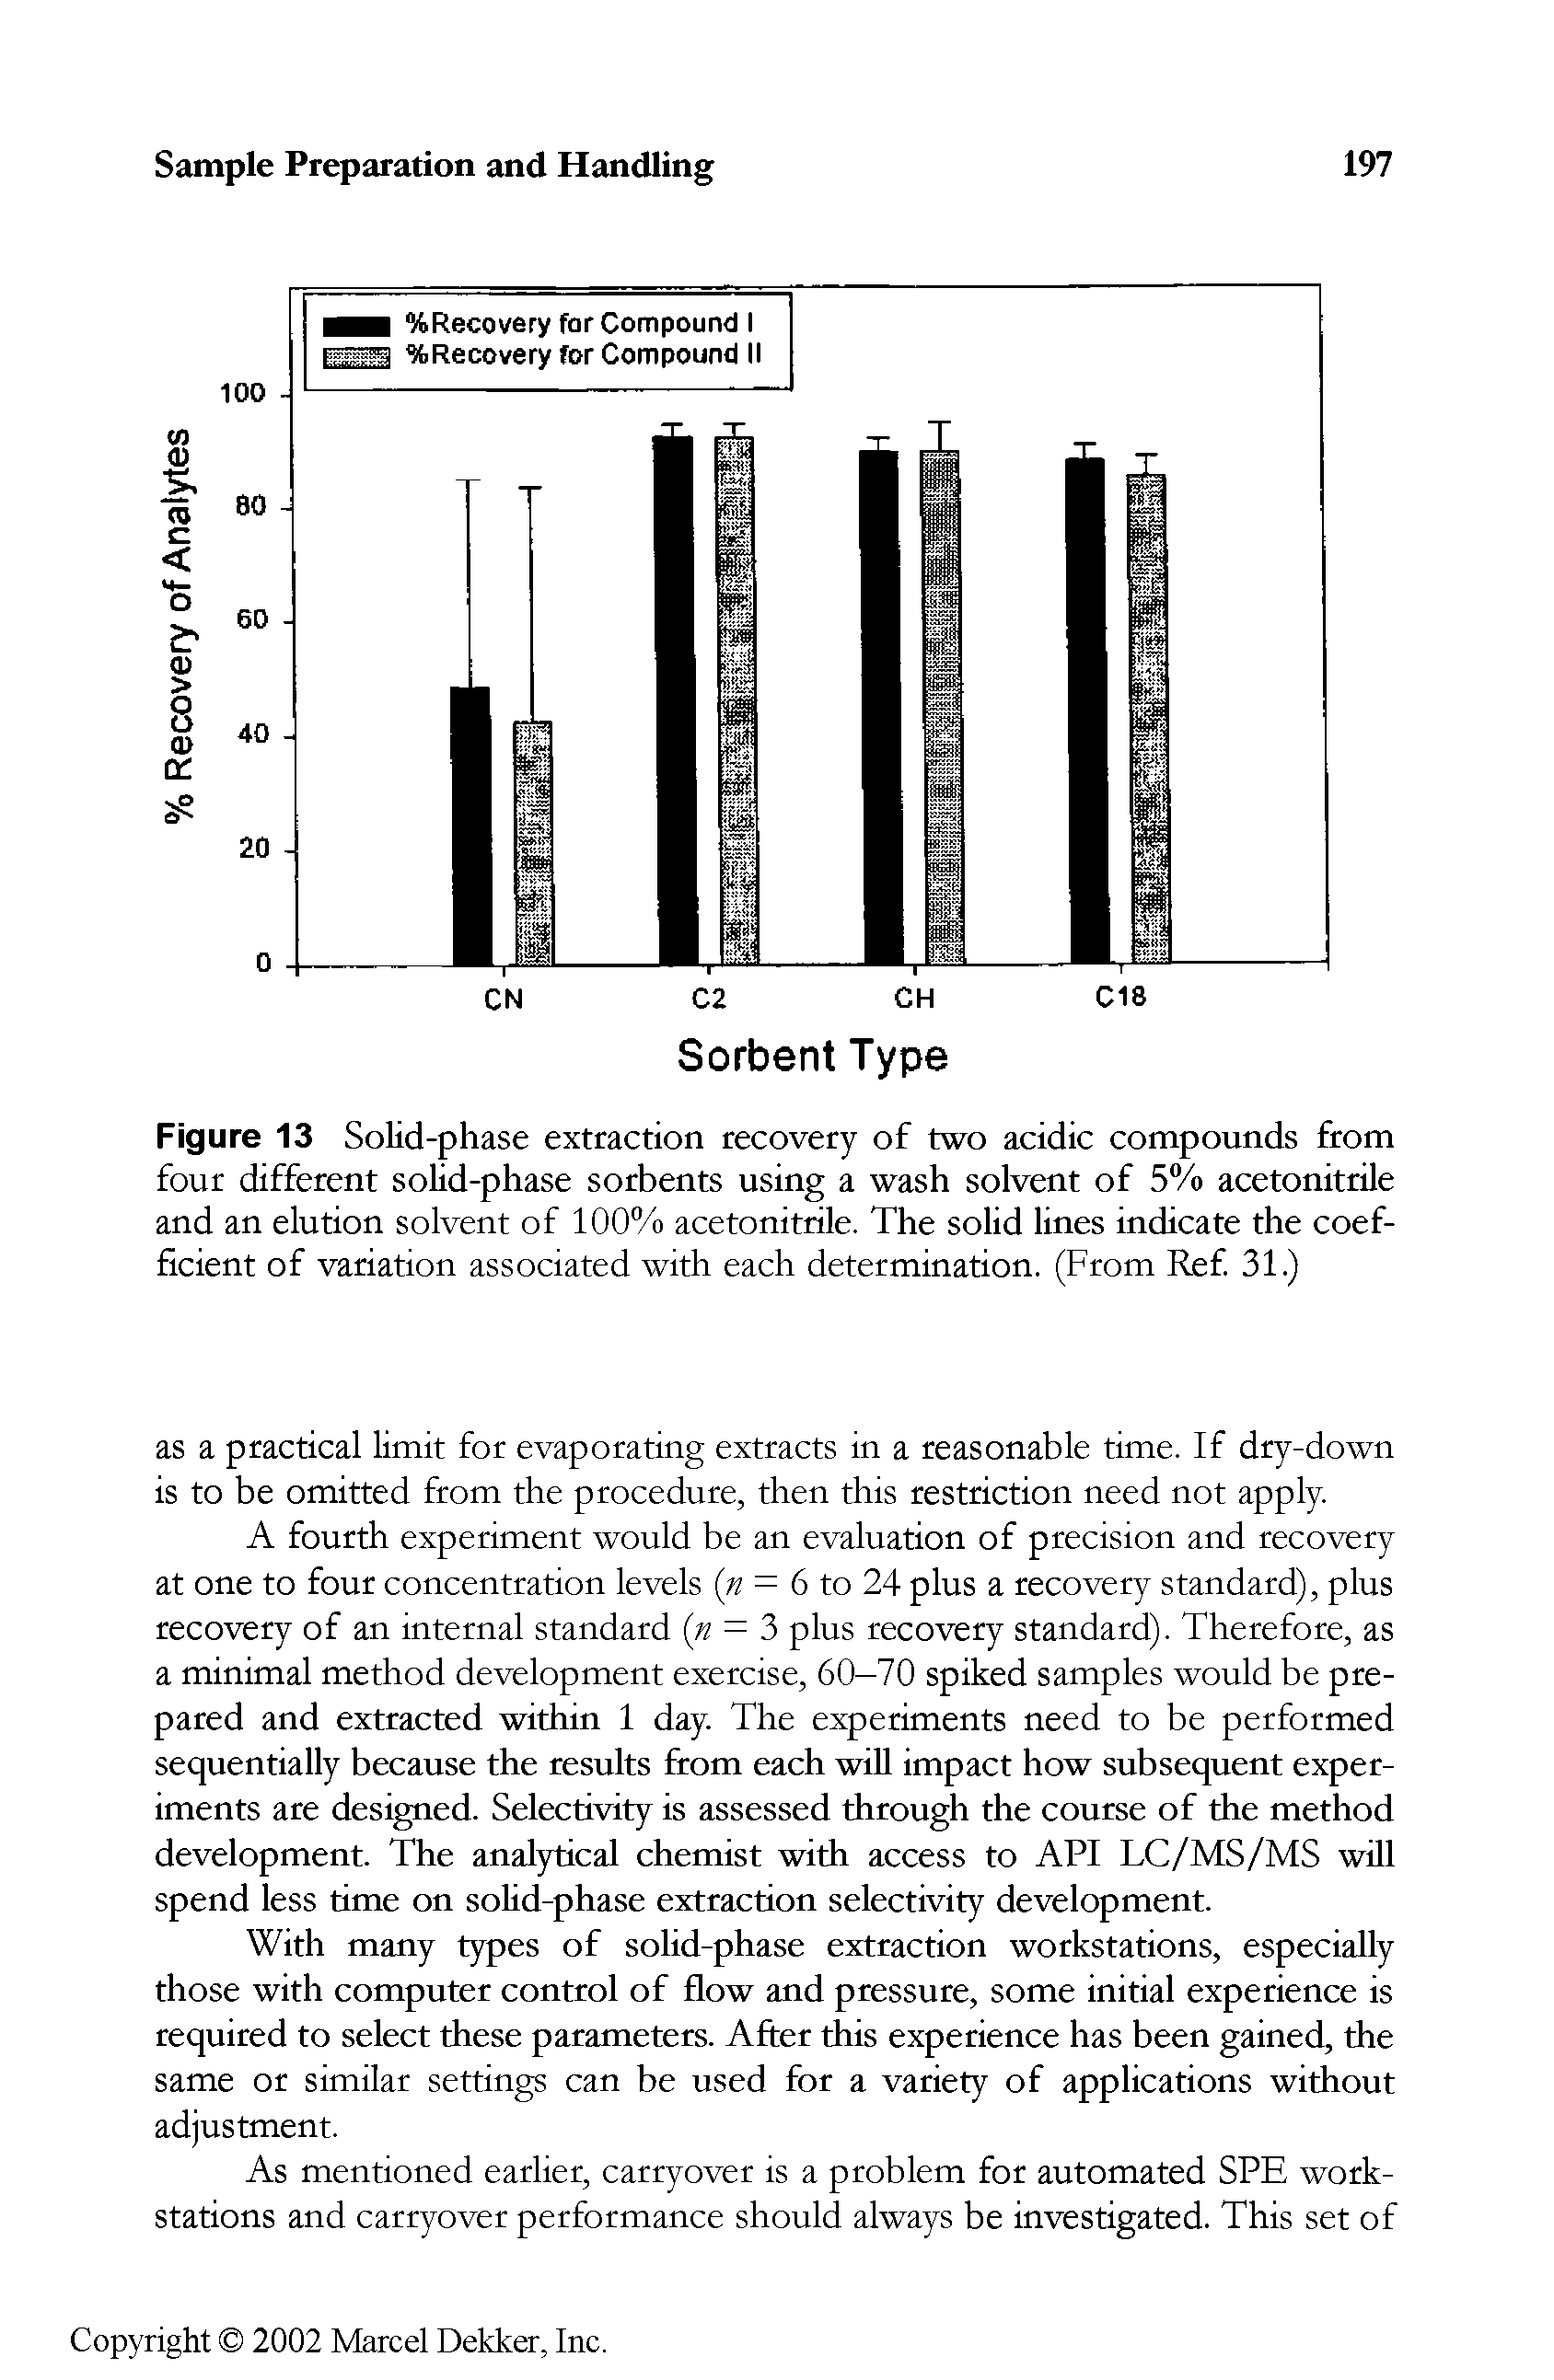 Figure 13 Solid-phase extraction recovery of two acidic compounds from four different solid-phase sorbents using a wash solvent of 5% acetonitrile and an elution solvent of 100% acetonitrile. The solid lines indicate the coefficient of variation associated with each determination. (From Ref. 31.)...